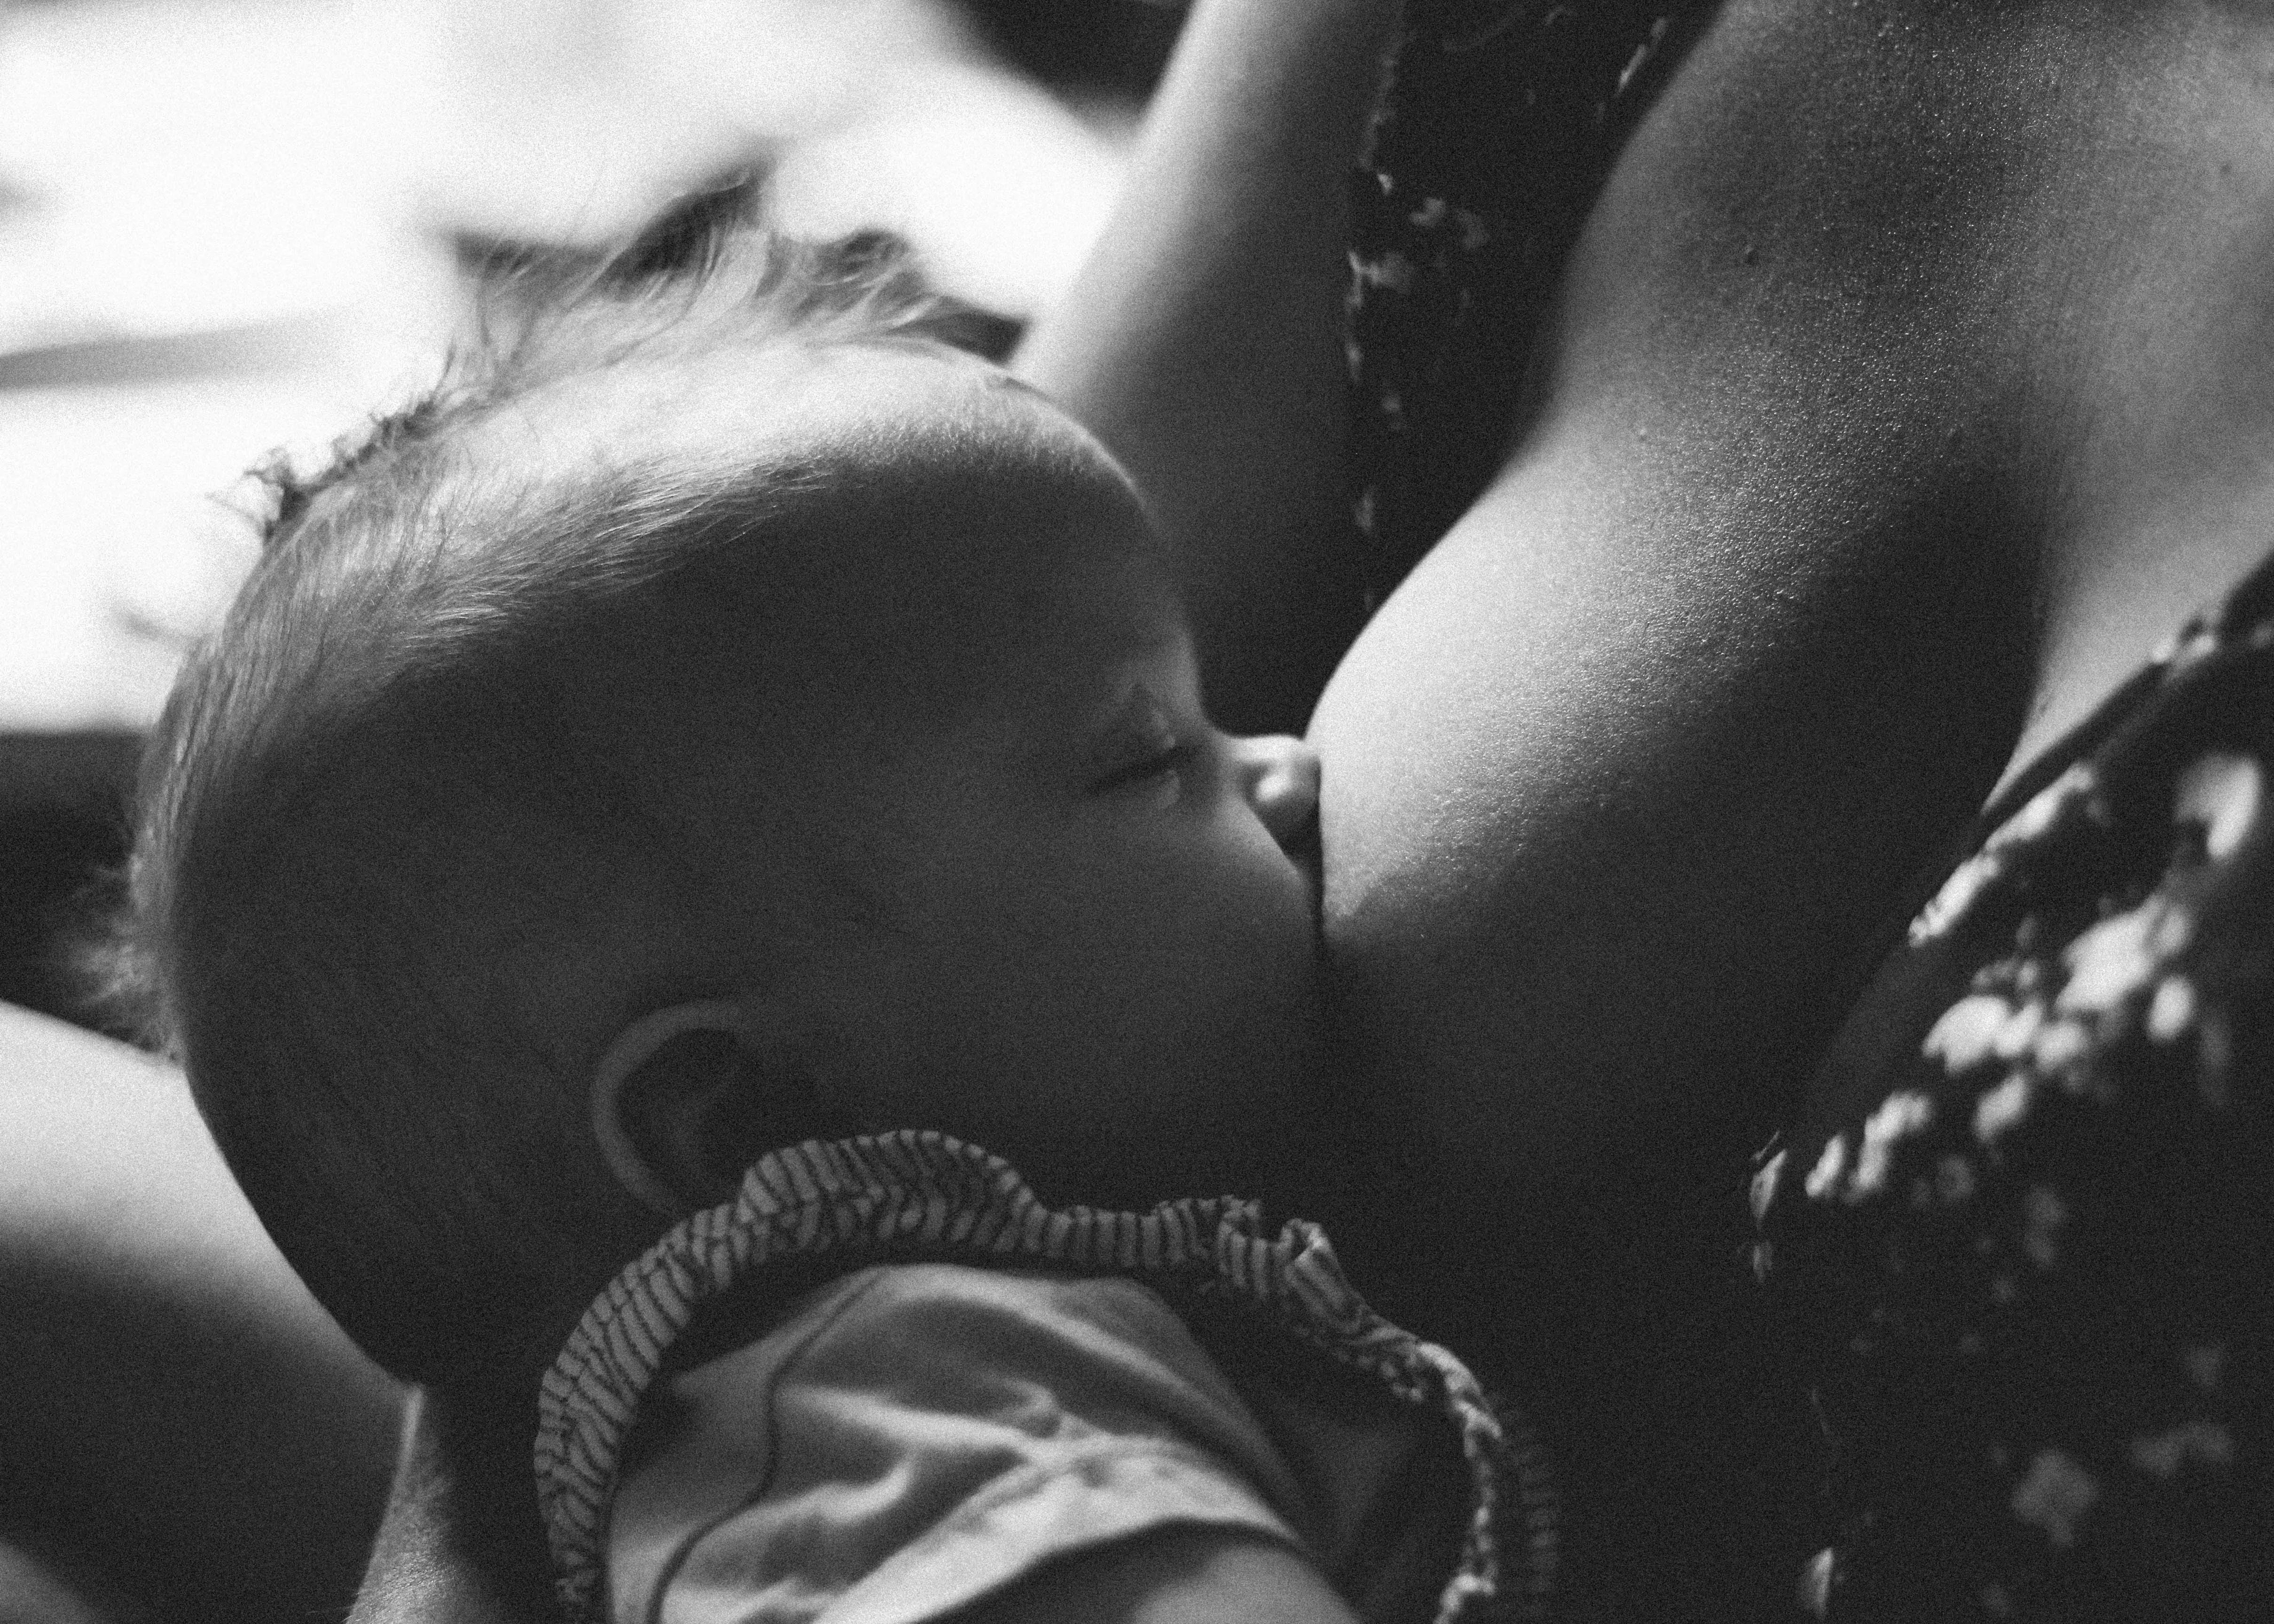 The Stages of Breastfeeding: From Colostrum to Mature Milk